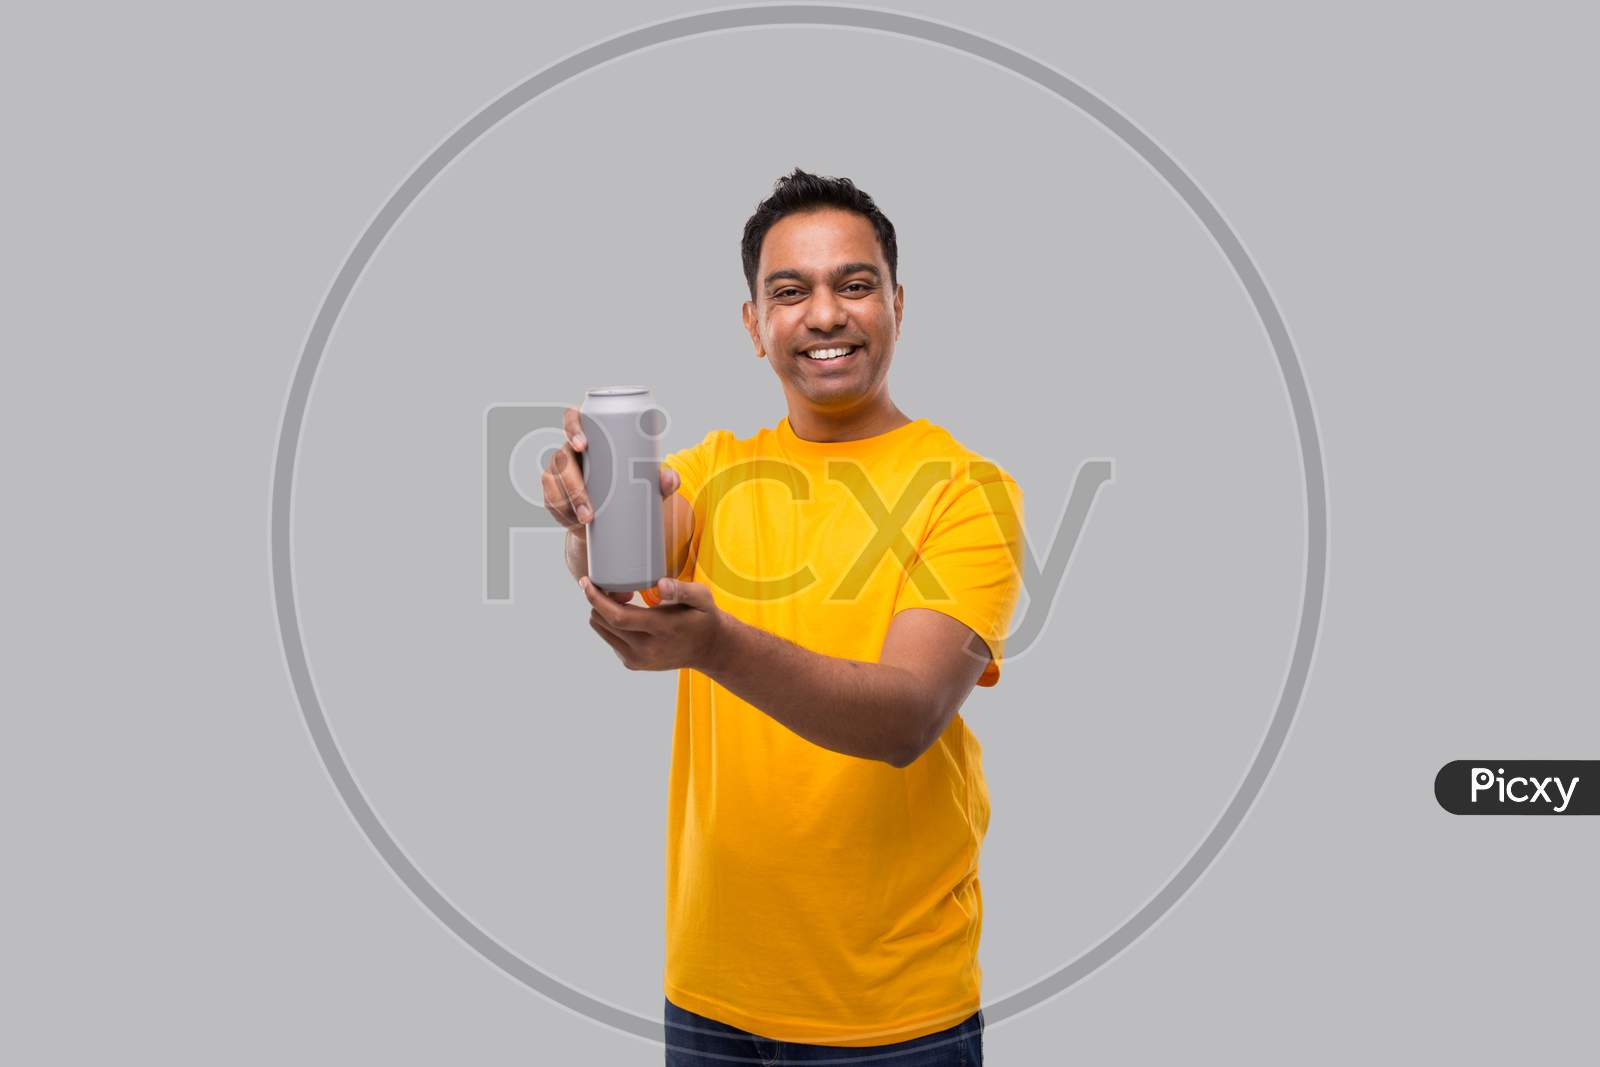 Indian Man Showing Tin Can Isolated. Drink